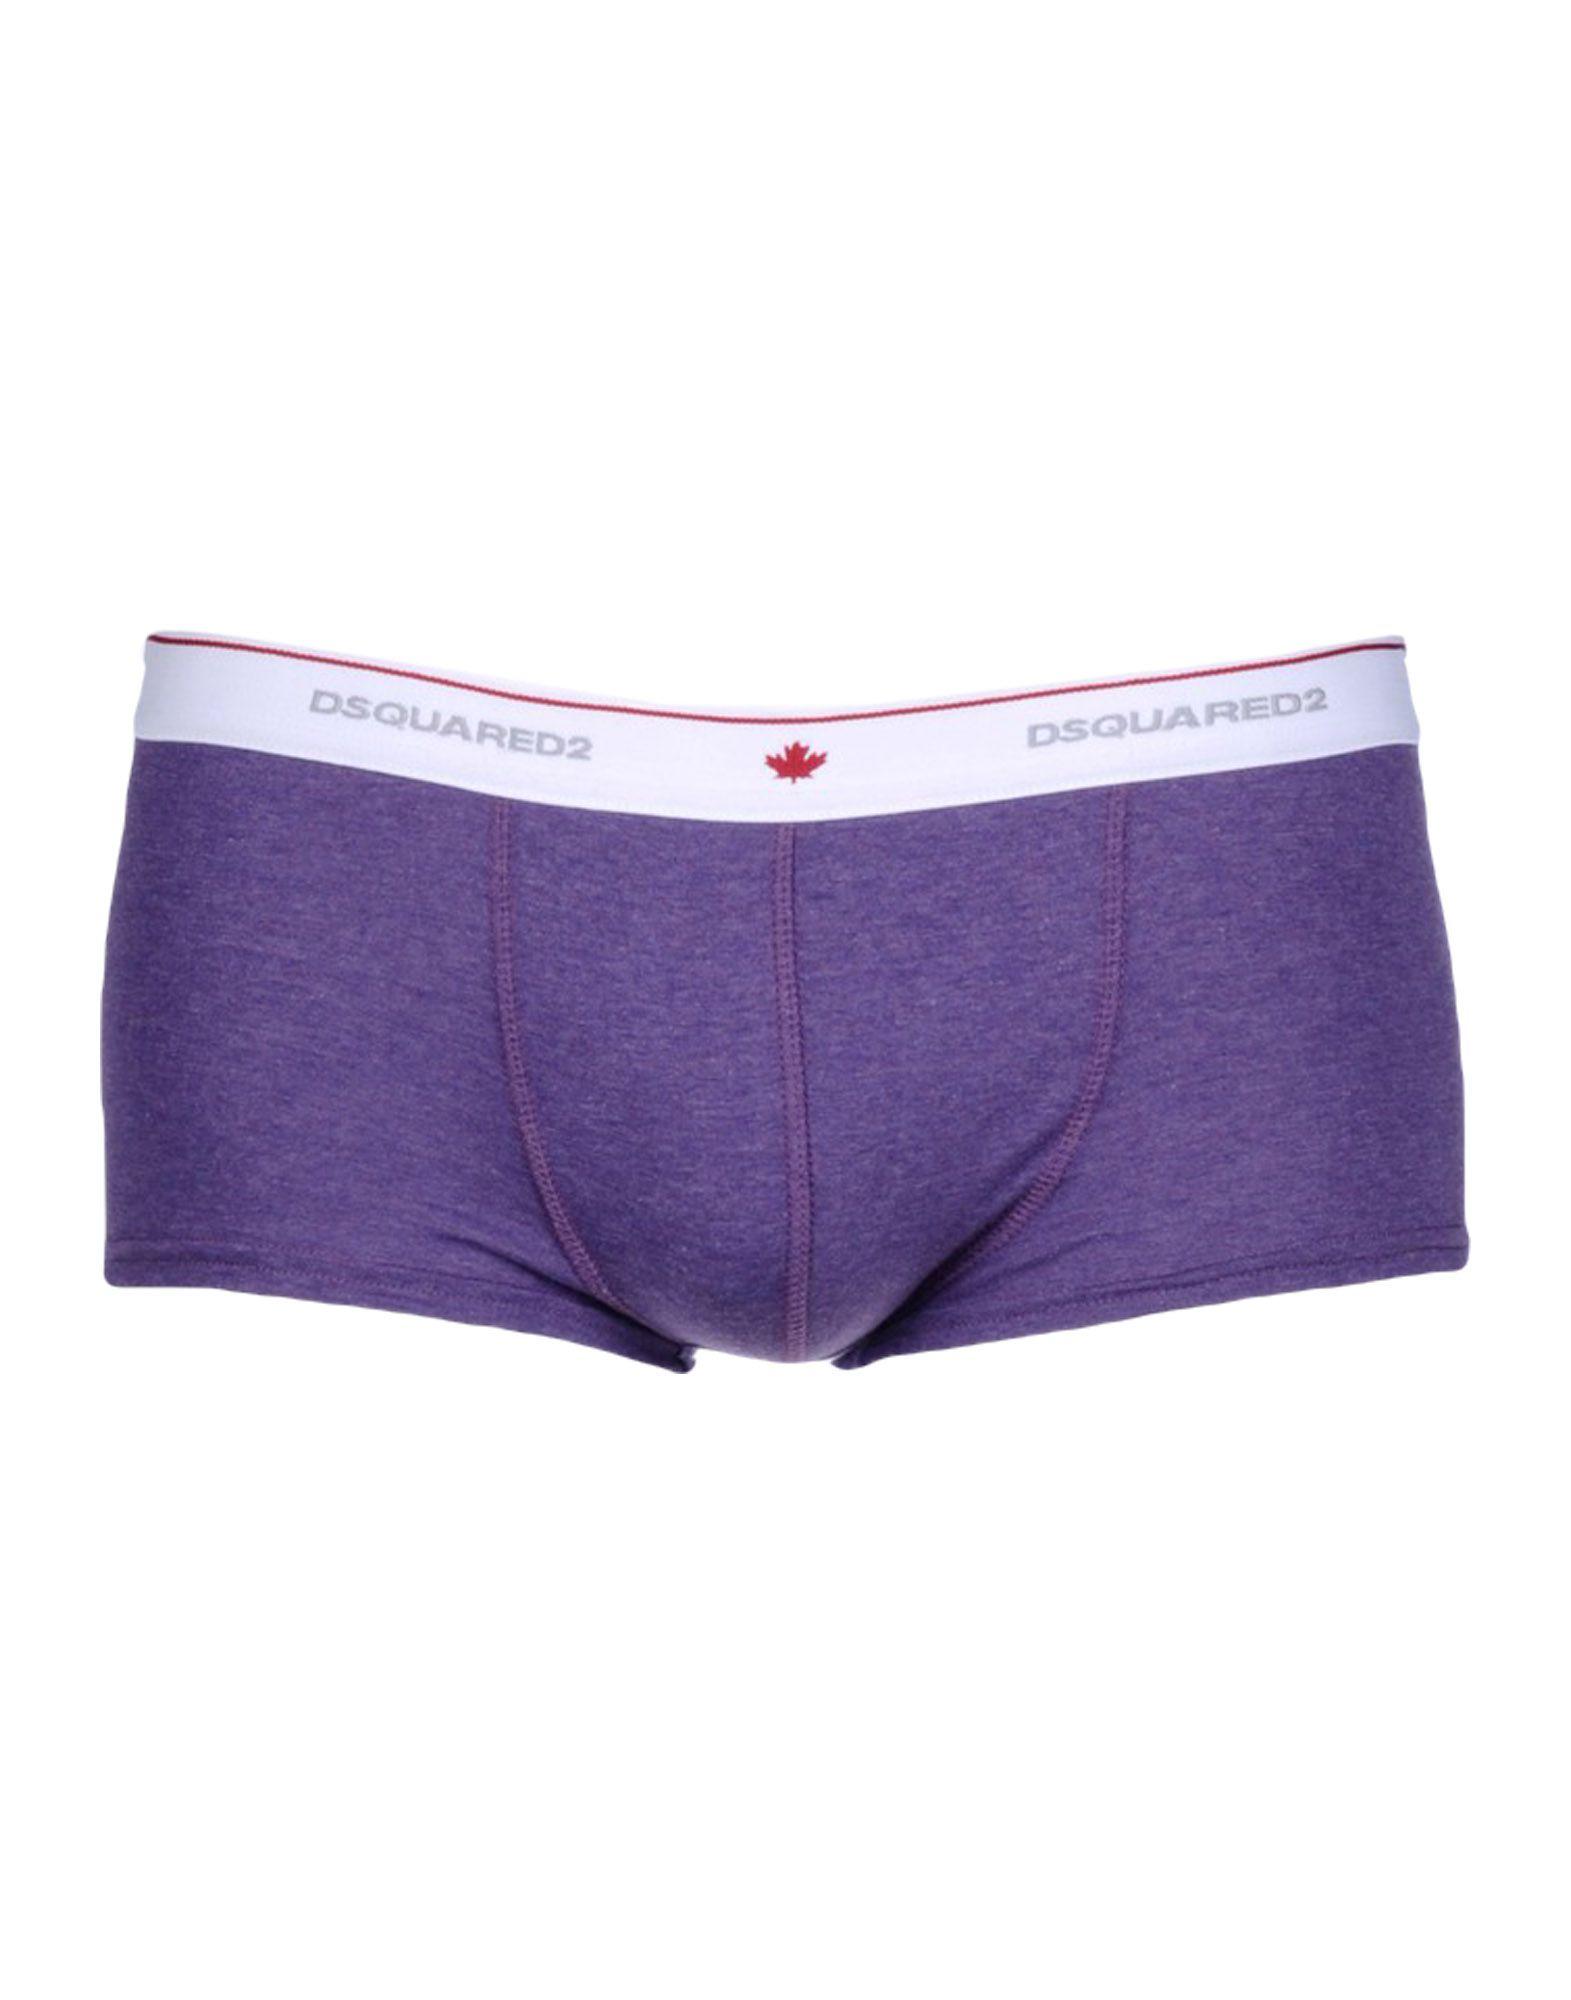 Lyst - DSquared² Boxer in Purple for Men